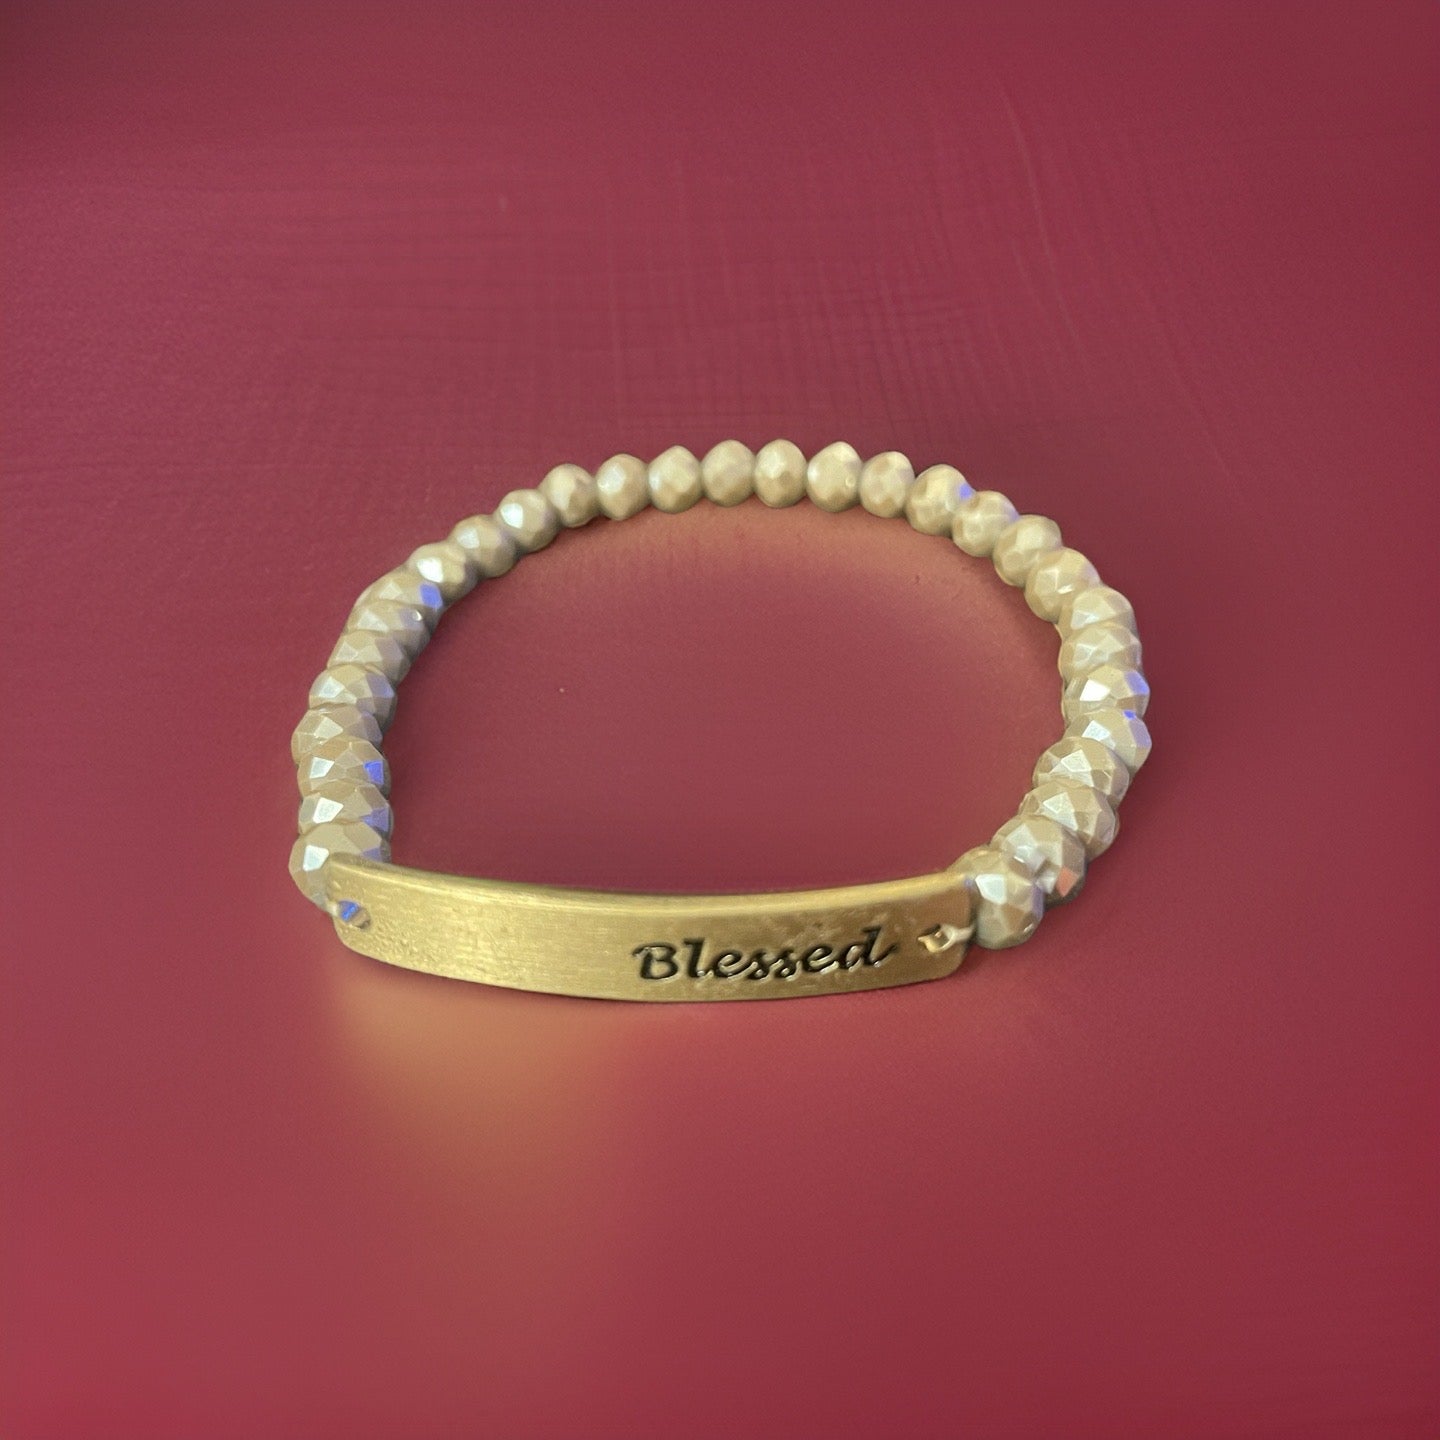 Blessed Faceted Bead Stretch Bracelet - Available in 4 colors